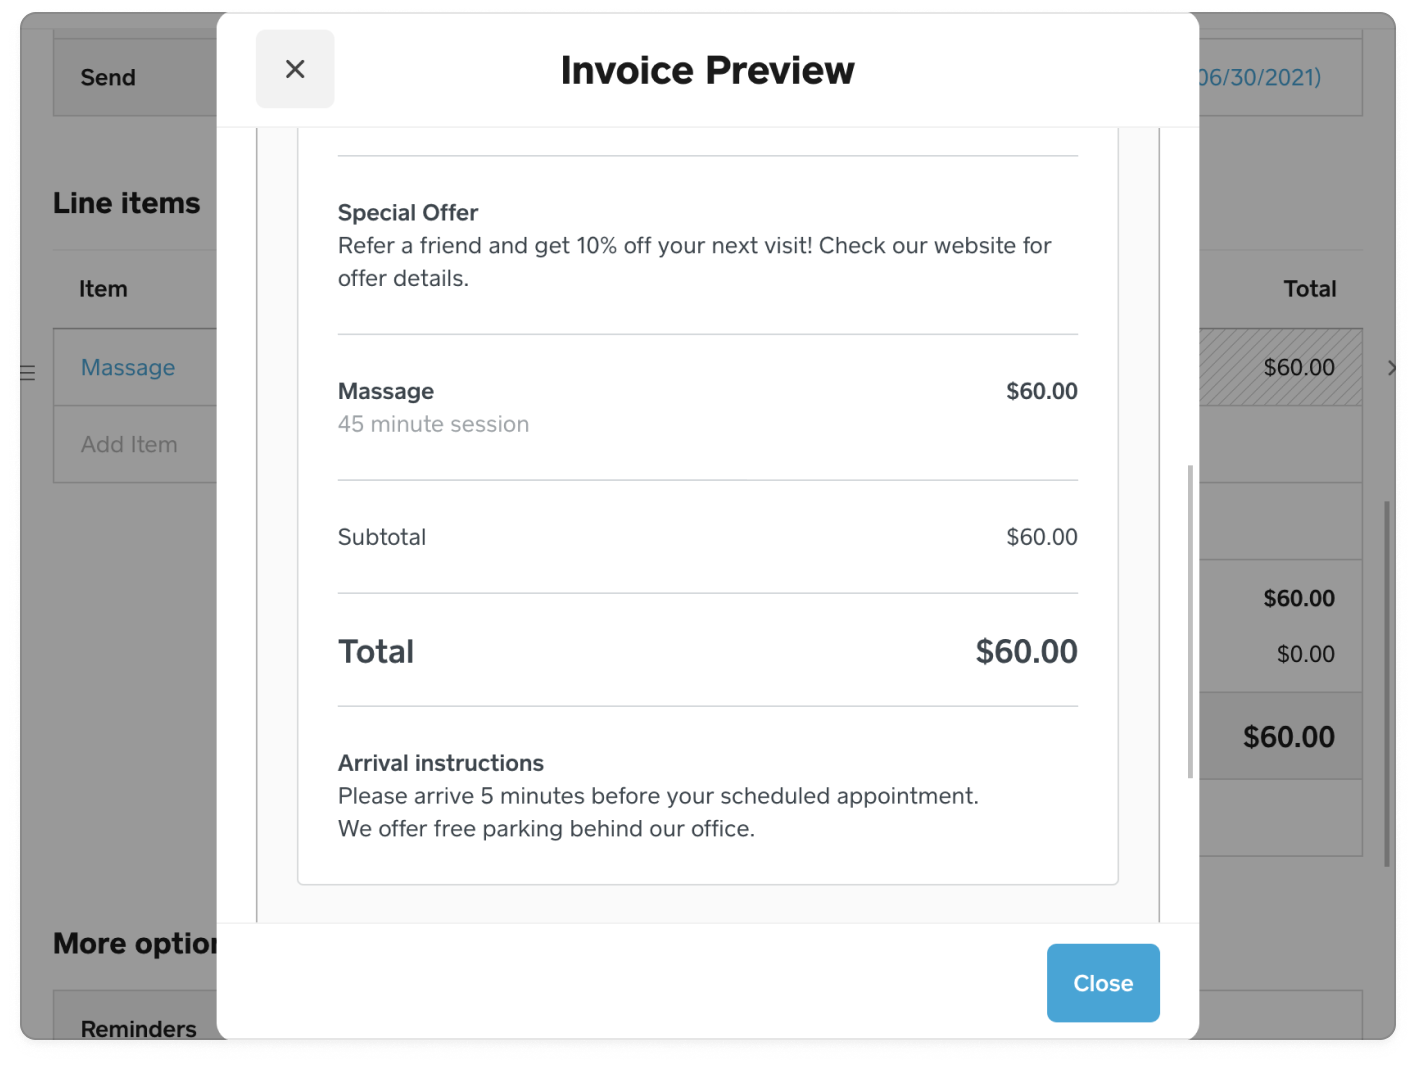 An invoice that includes a **Special Offer** custom field above the invoice line items and an **Arrival instructions** custom field below the invoice line items.